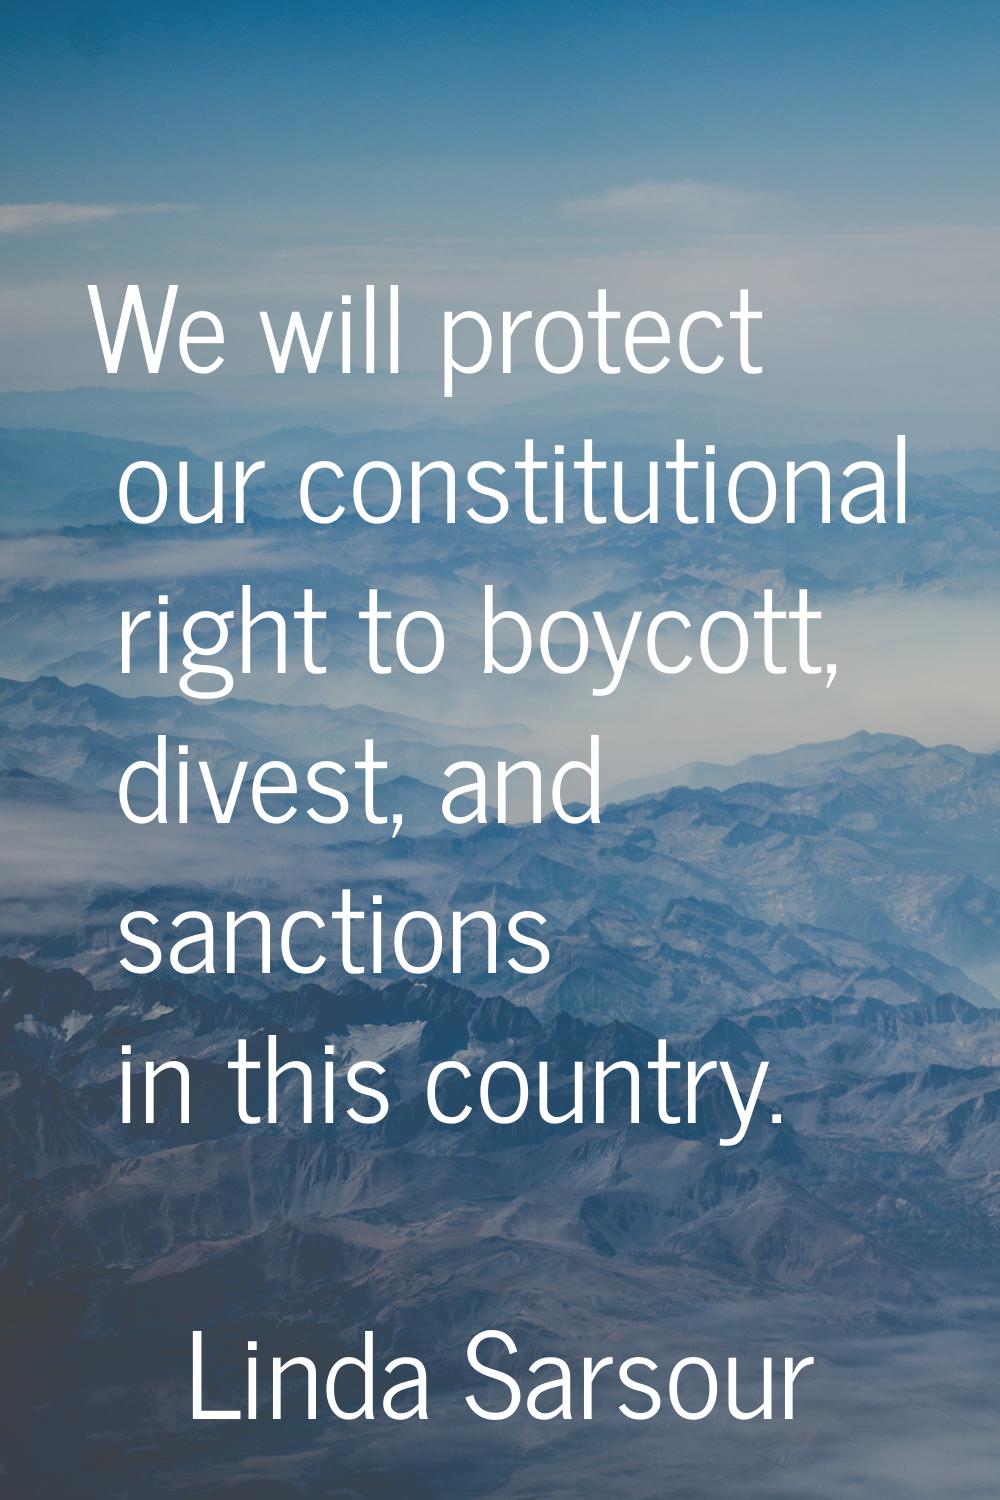 We will protect our constitutional right to boycott, divest, and sanctions in this country.